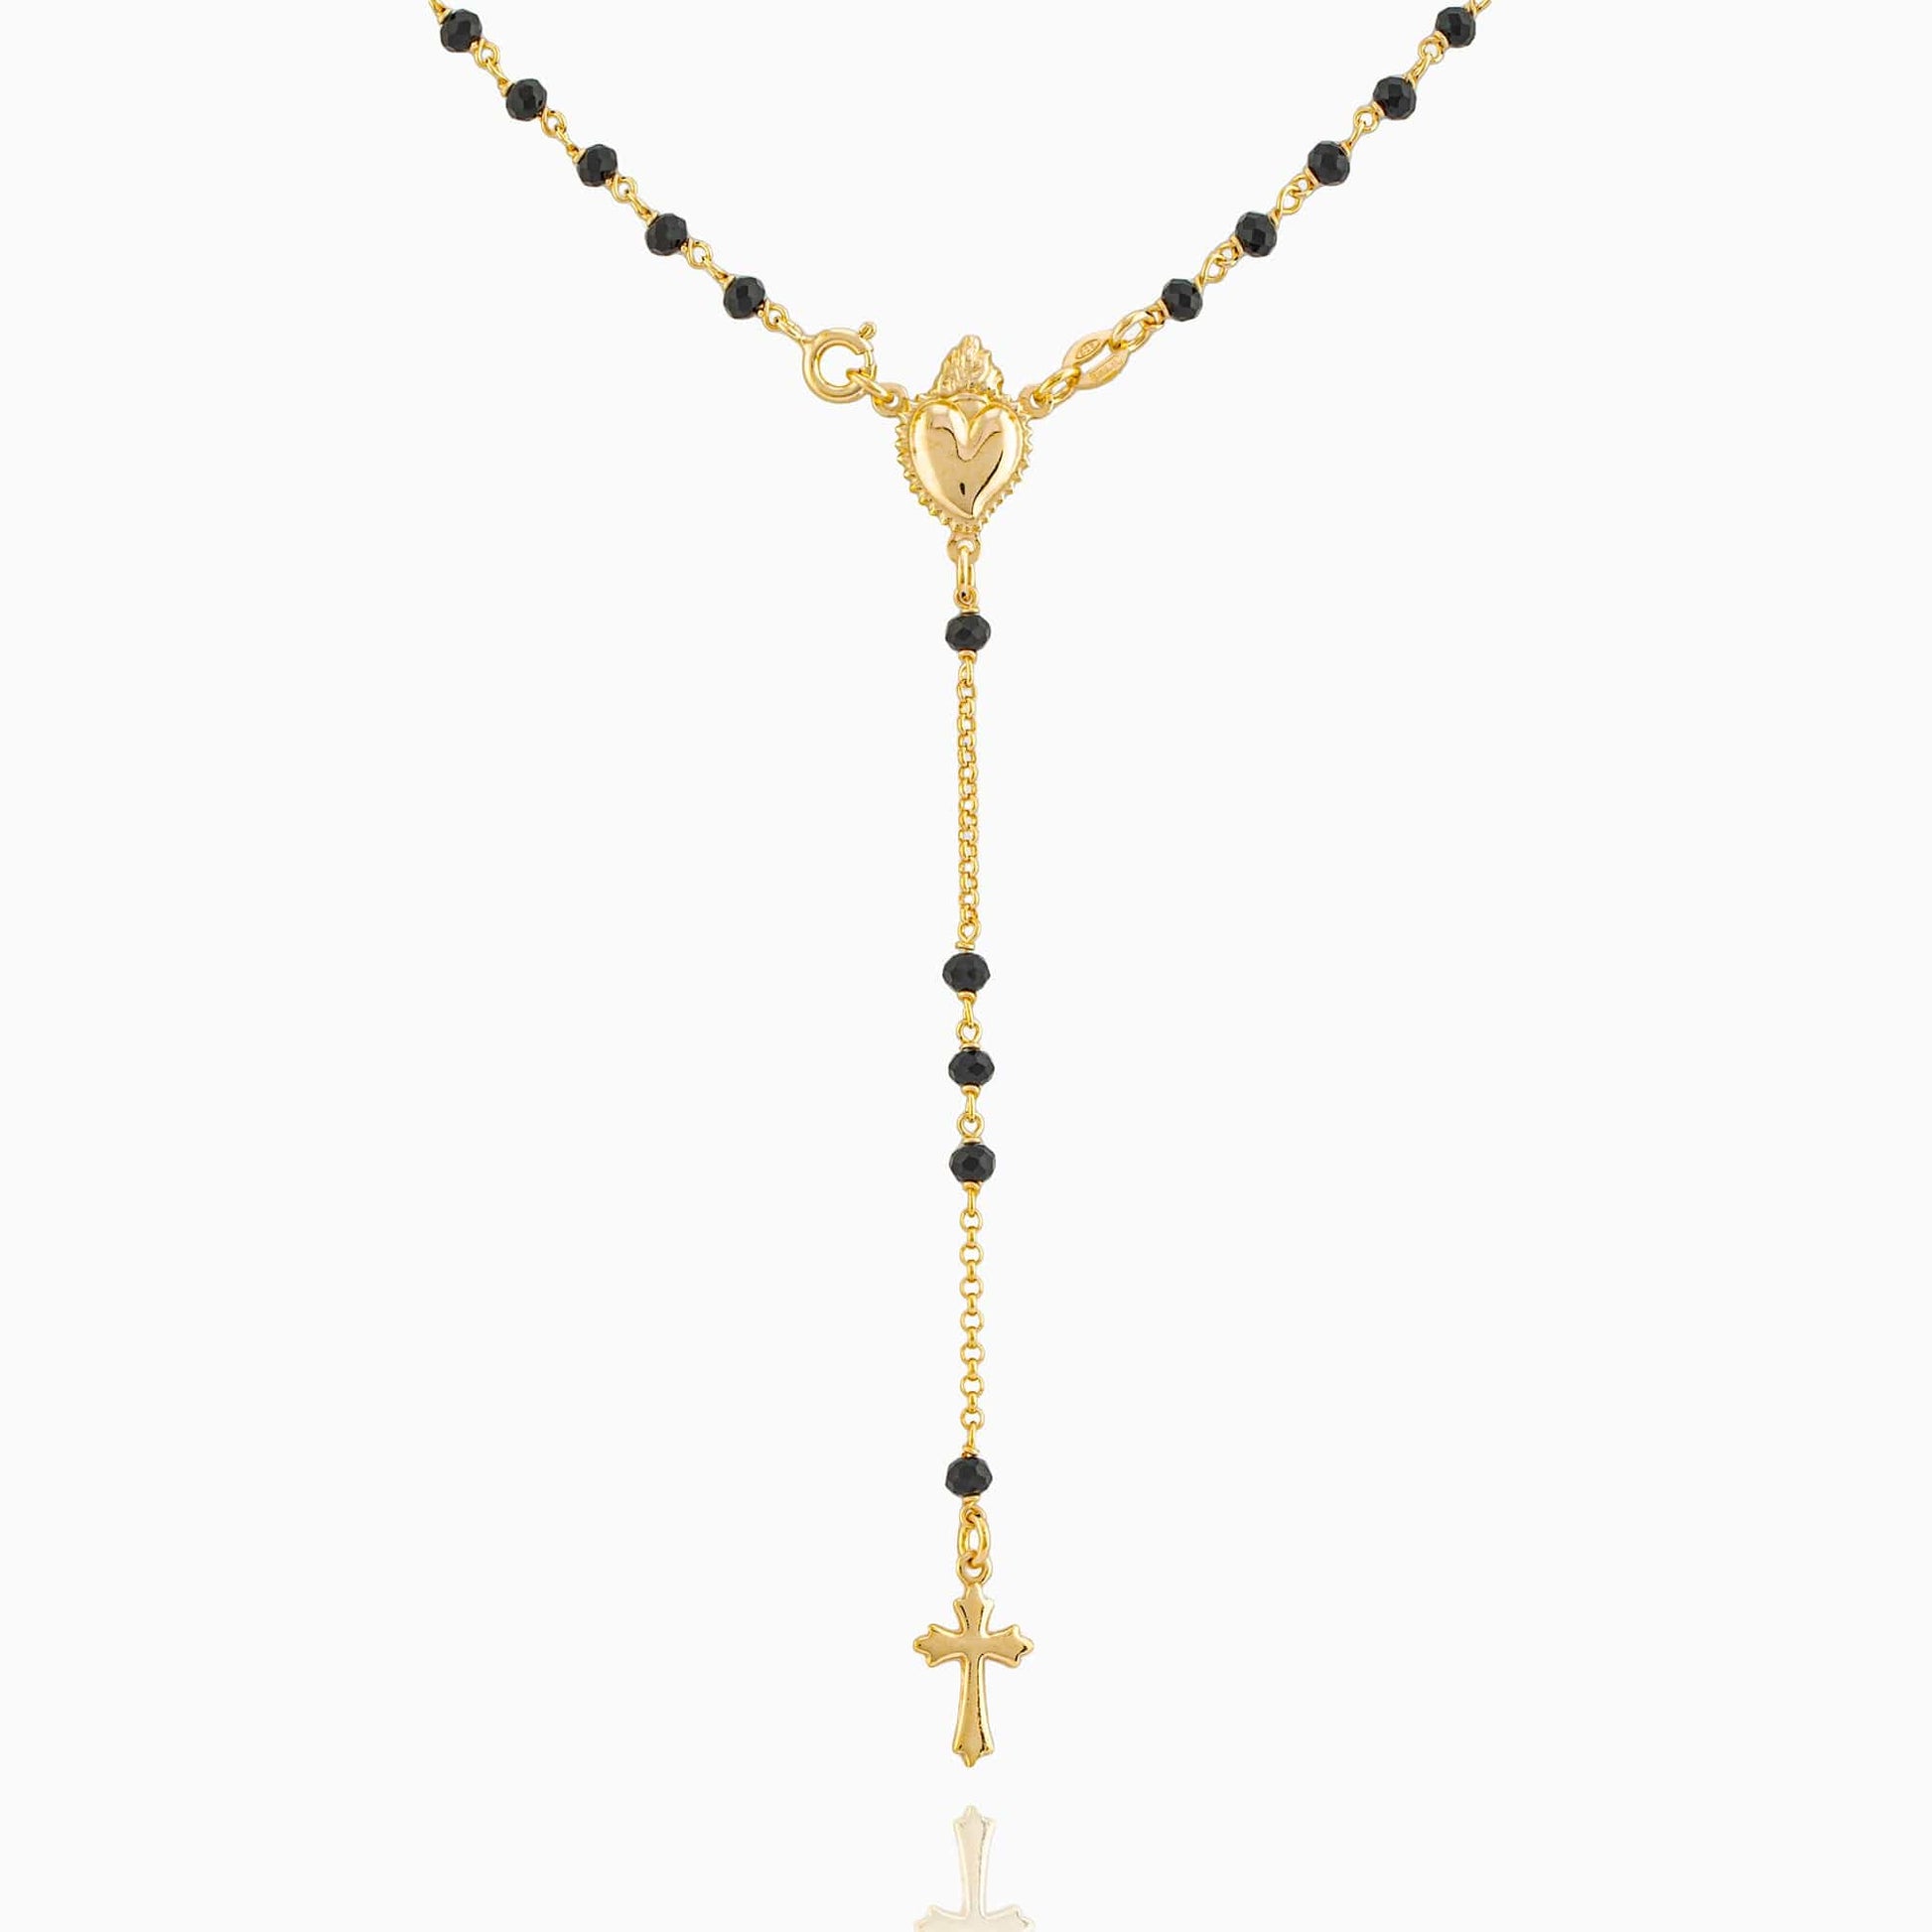 MONDO CATTOLICO Prayer Beads Gold / Cm 46 (18.1 in) STERLING SILVER ROSARY SACRED HEART 3MM BLACK BEADS